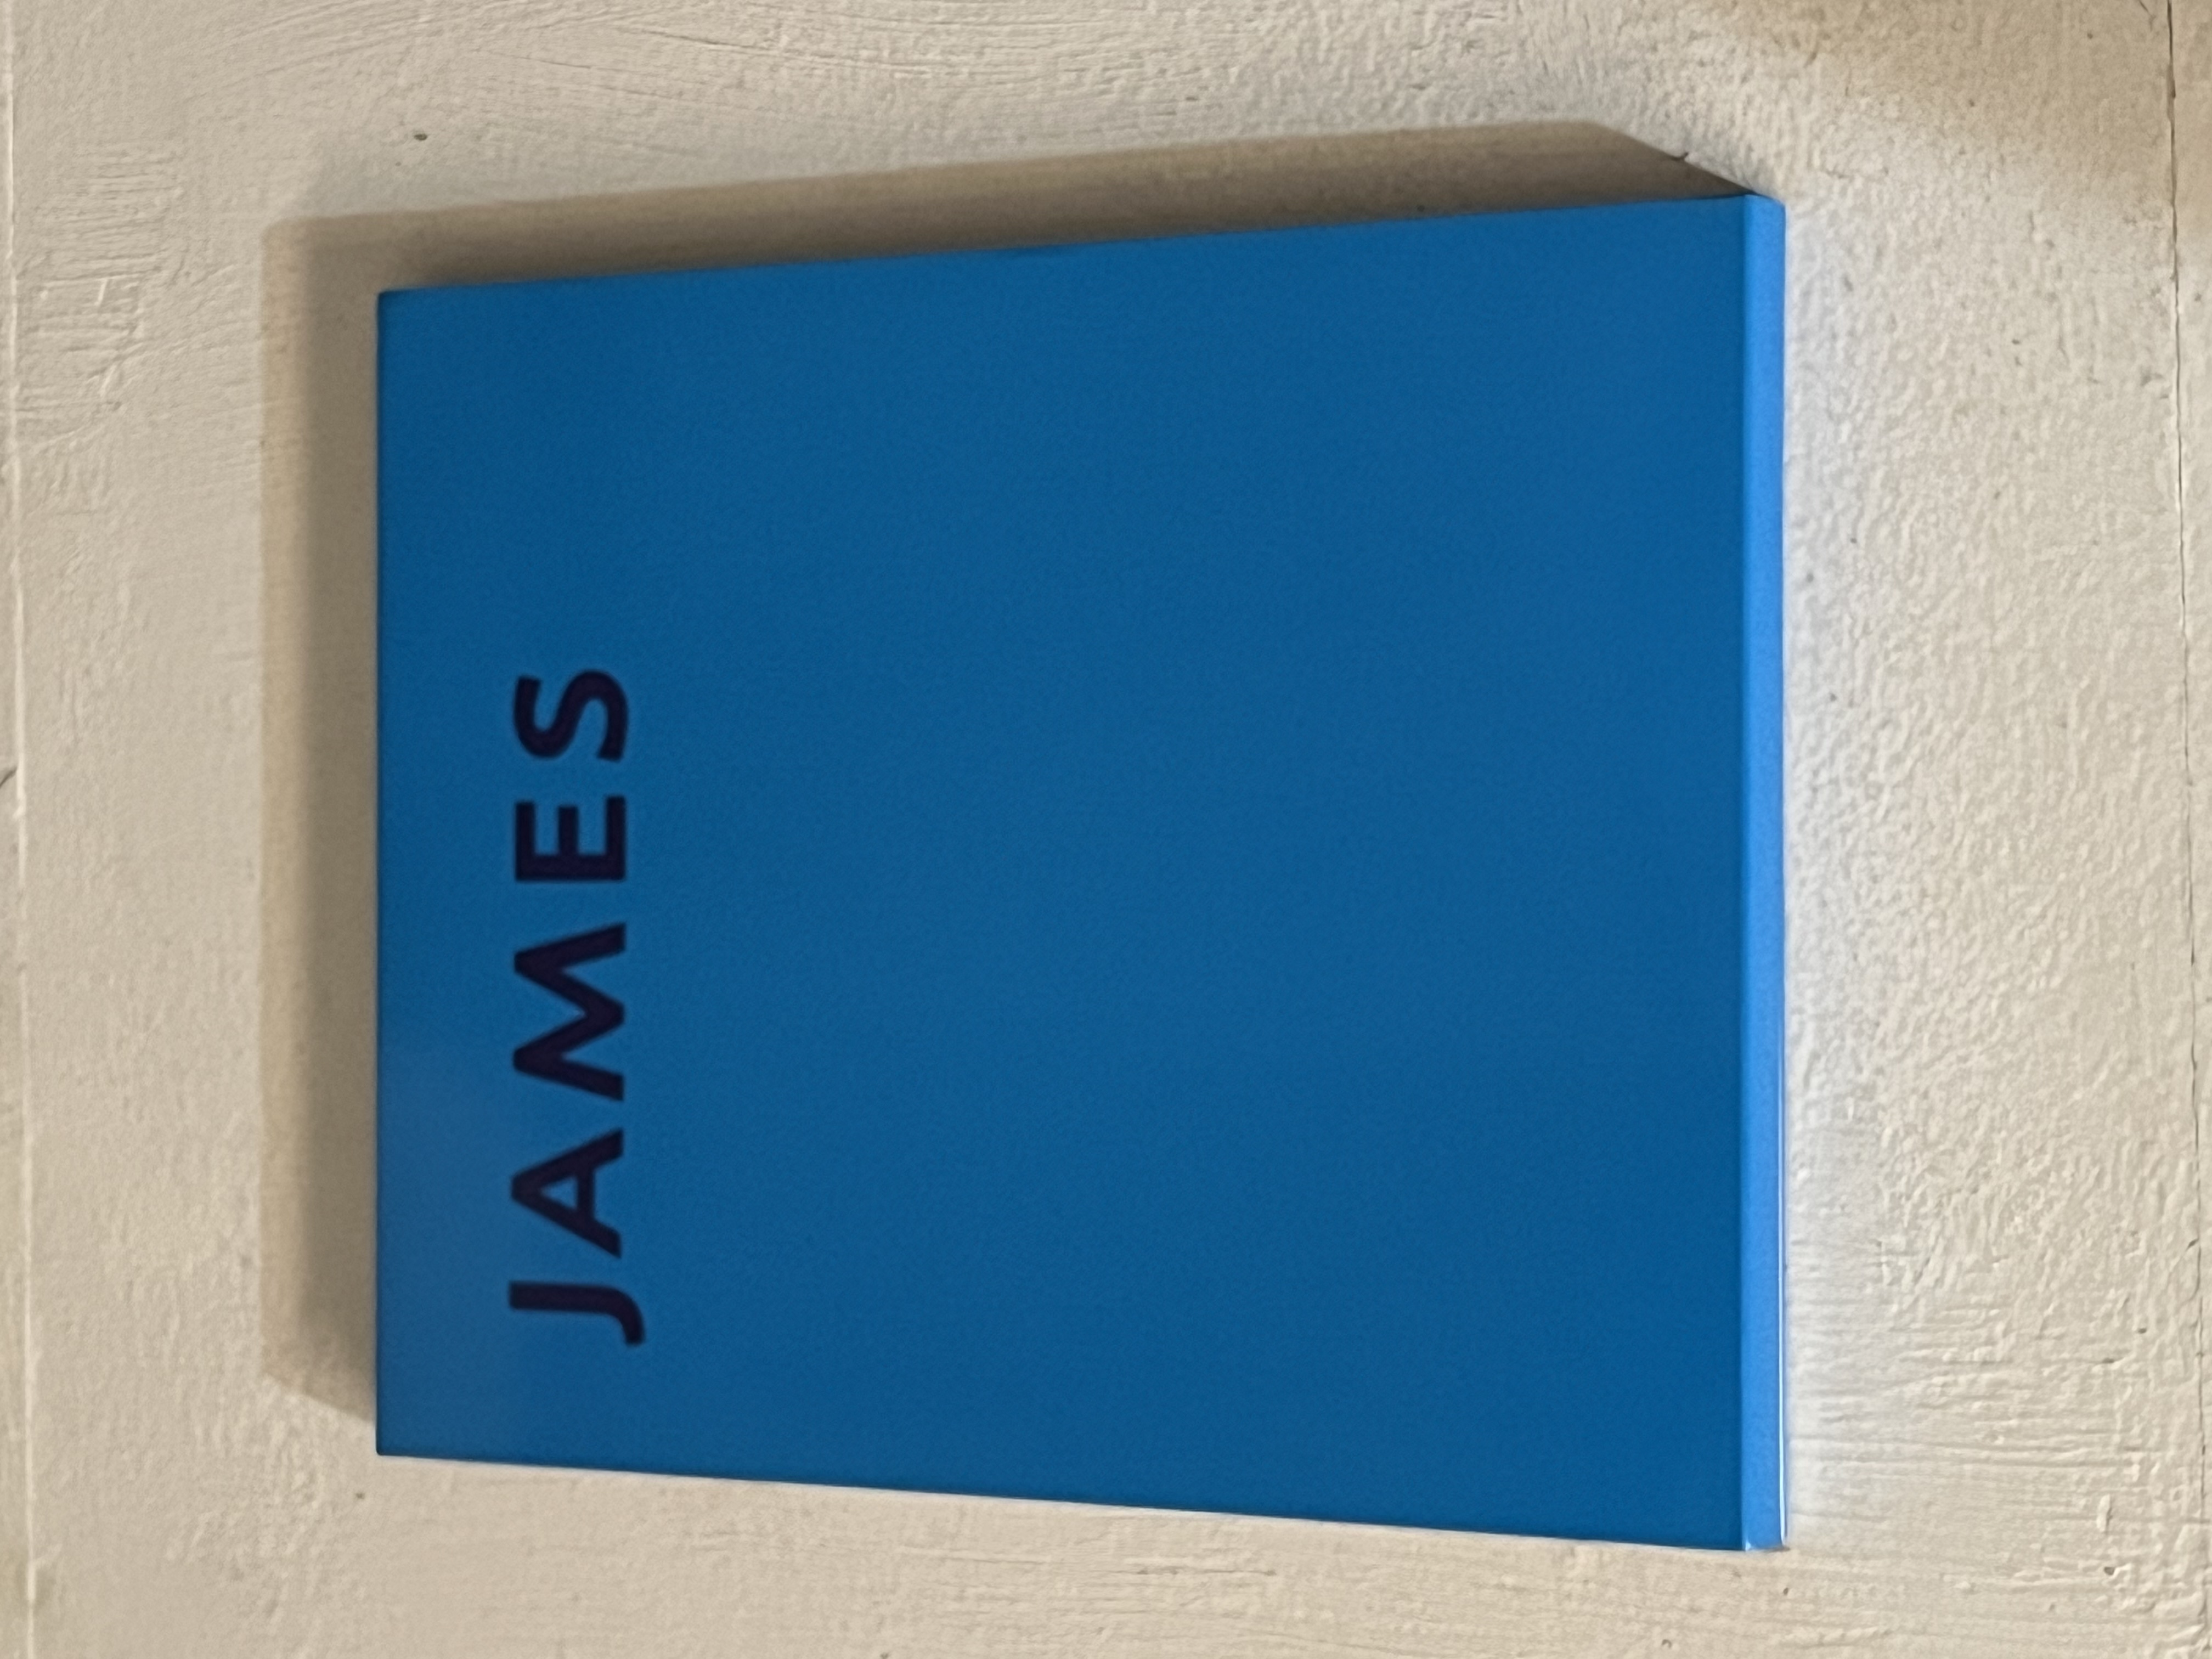 James Turrell by James Turrell, Miwon Kwon: Near Fine Hardcover (2010 ...